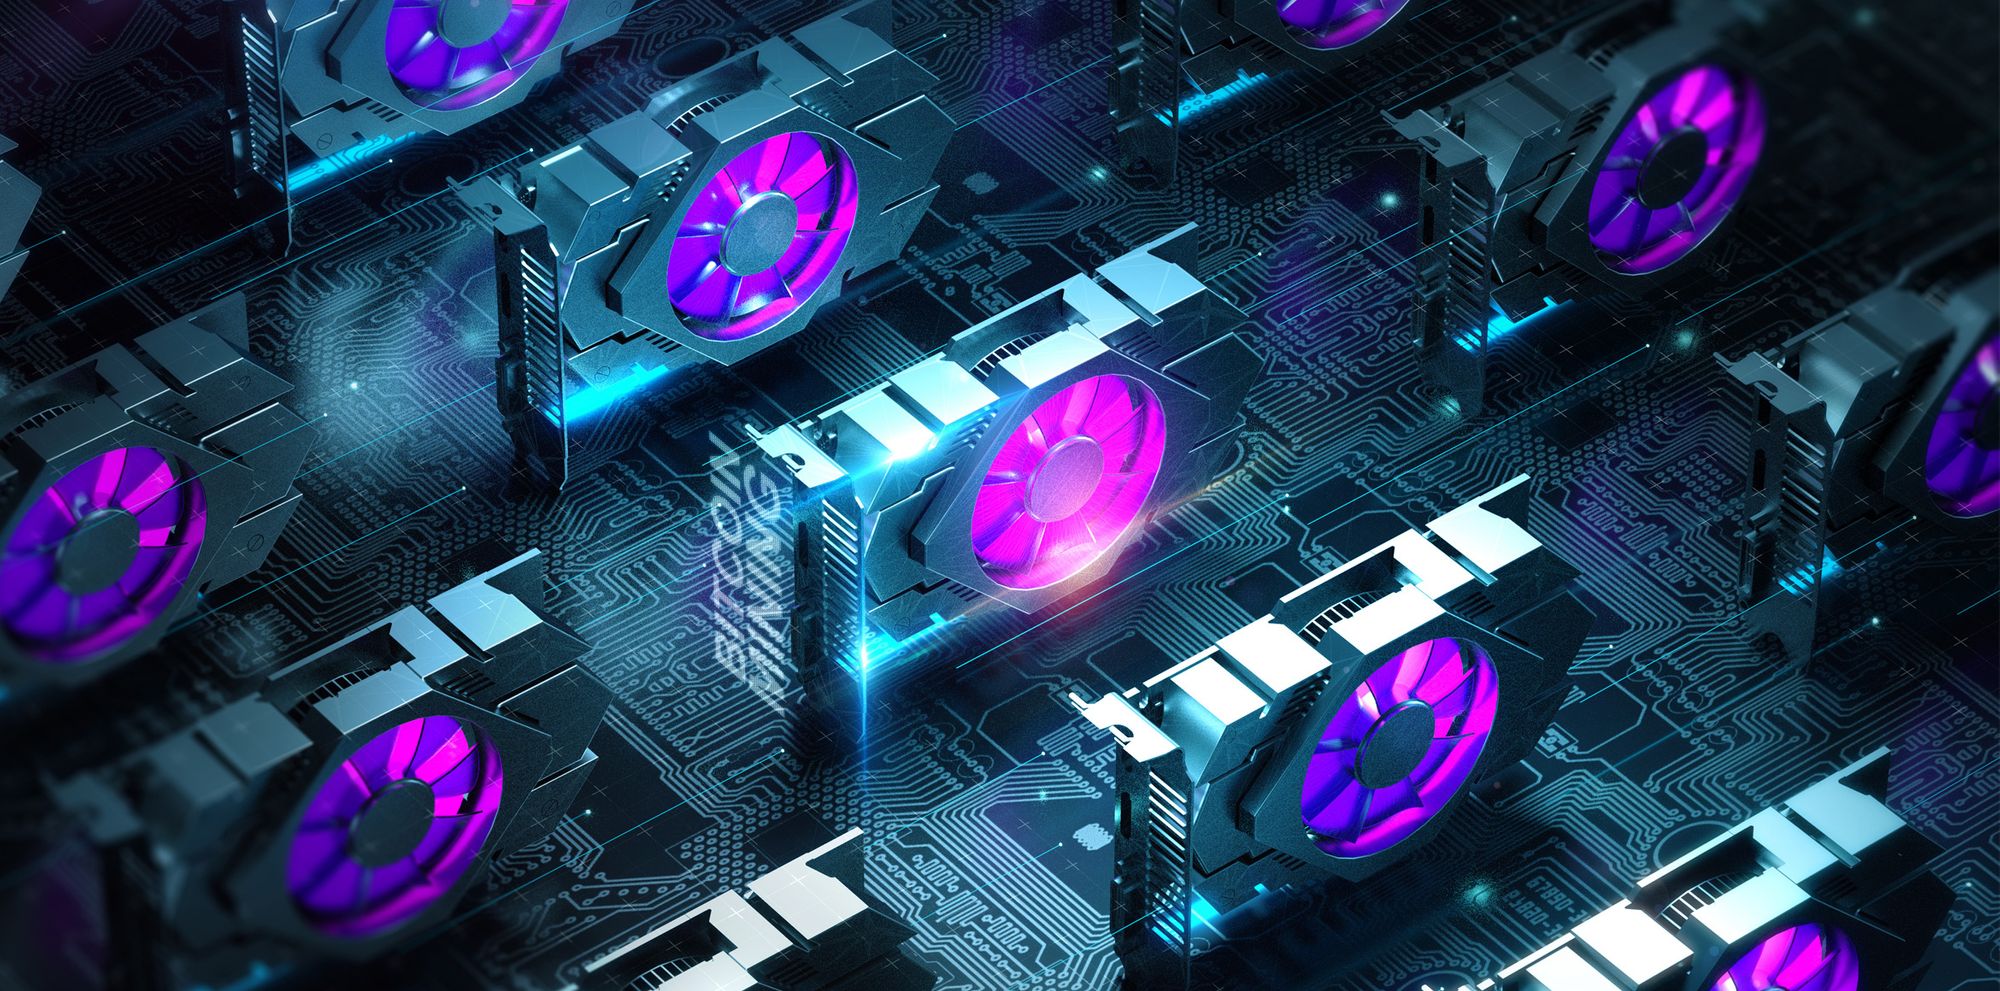 2020's Best GPU for Mining (Most Up to Date Guide) | Best Mining GPU